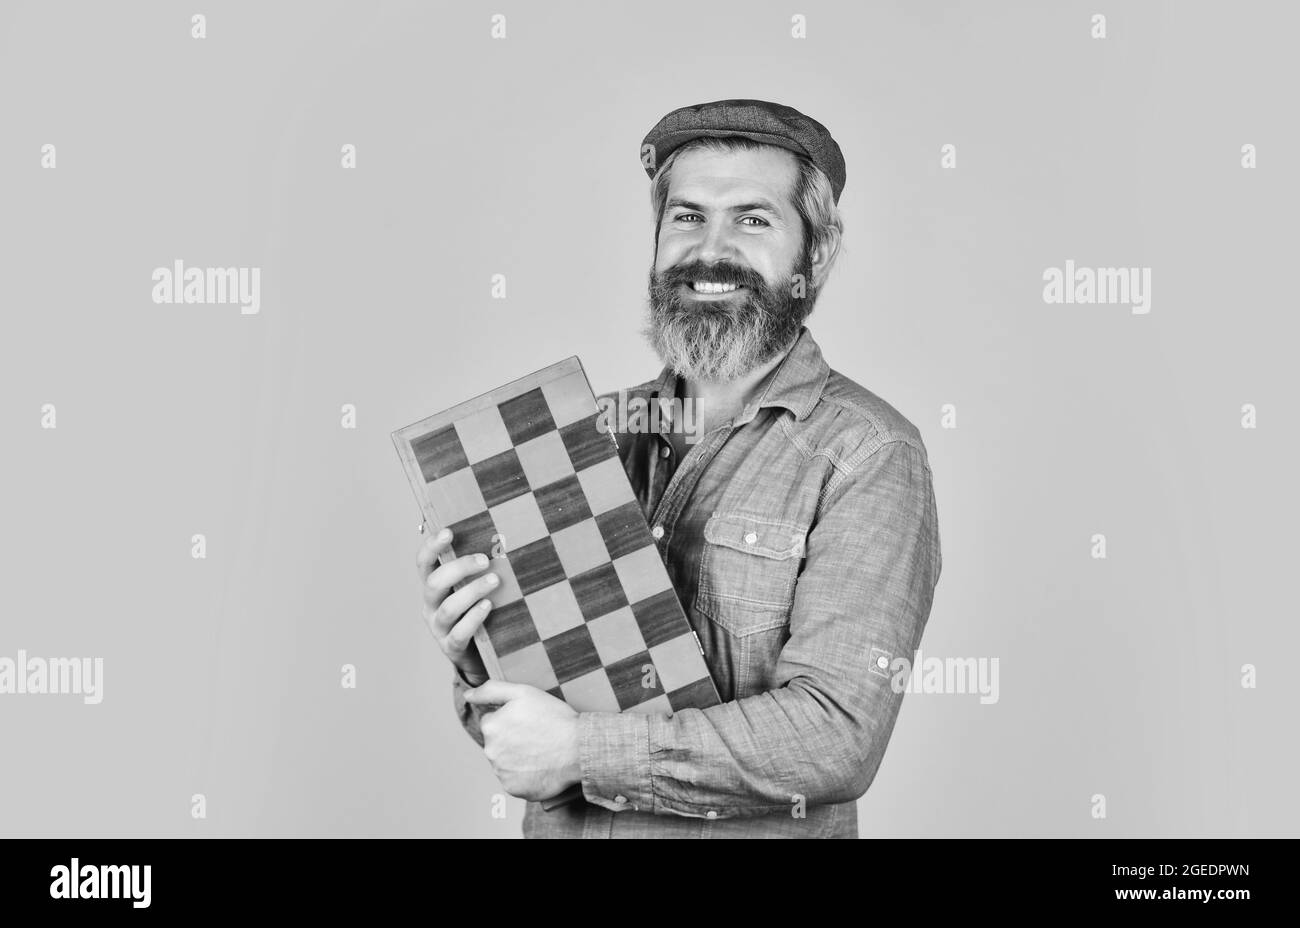 chess battle and victory. board game concept. competition and strategy ideas. business challenge competition. man play chess game. concept of business Stock Photo